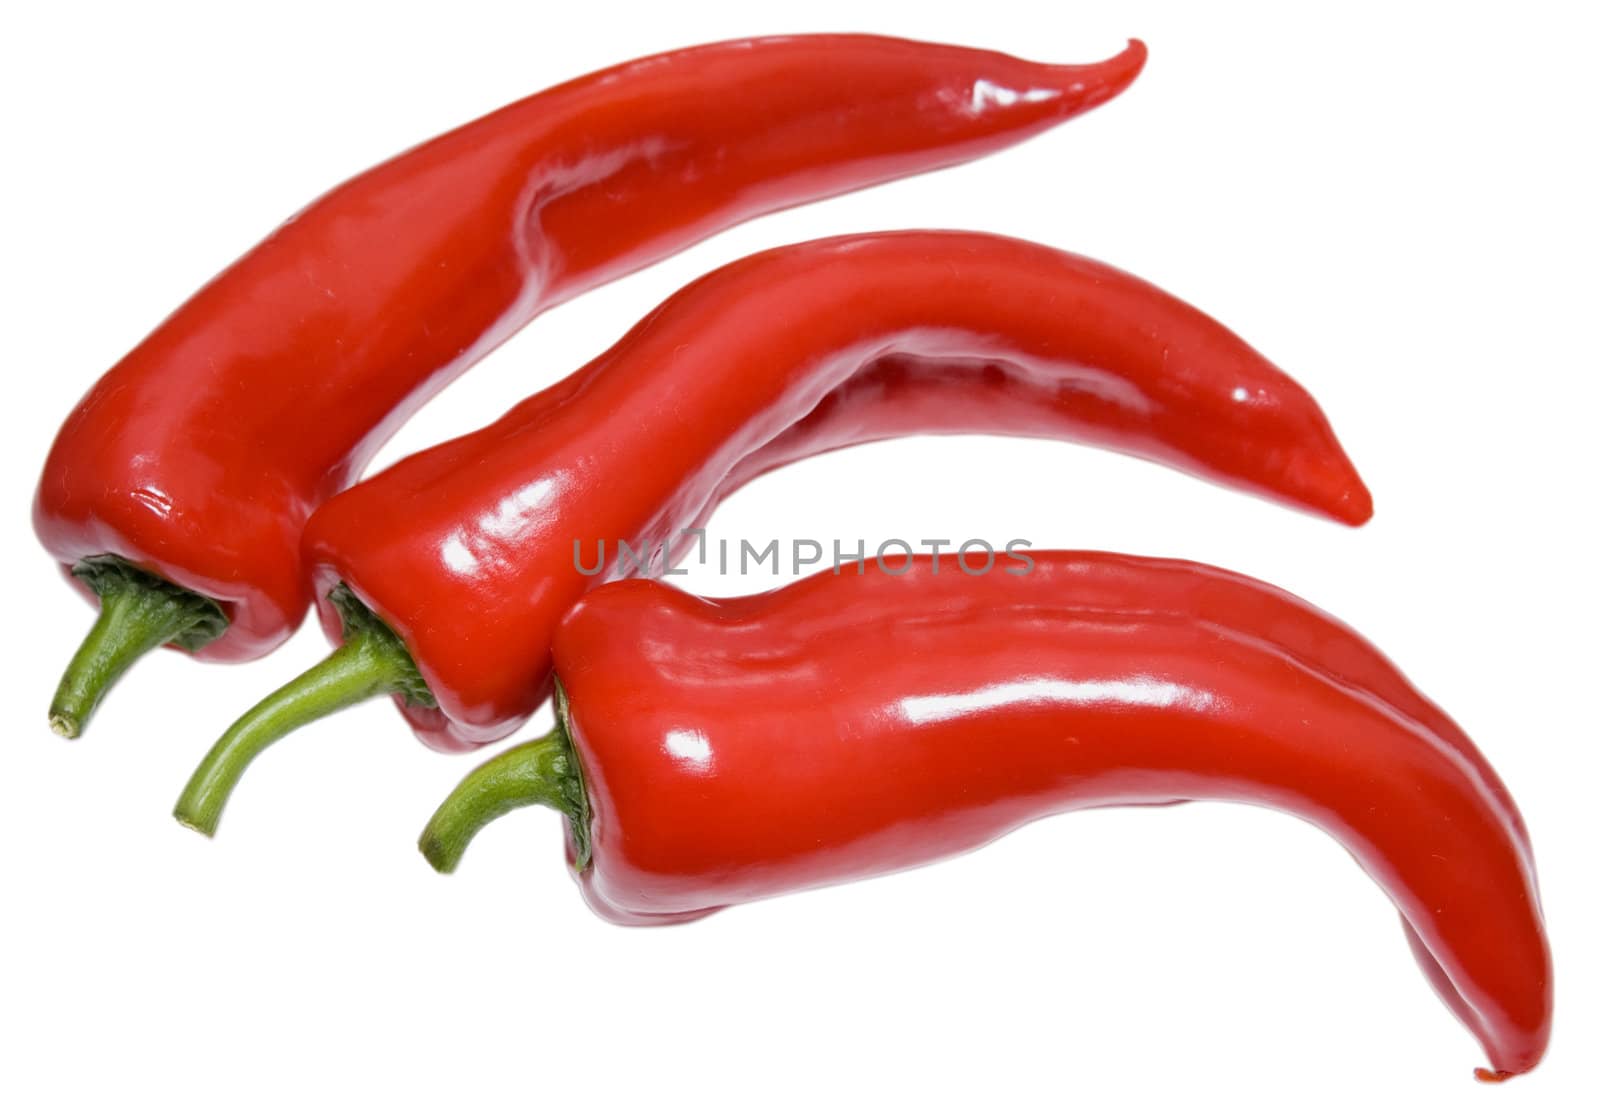 The red pepper isolated on a white background.